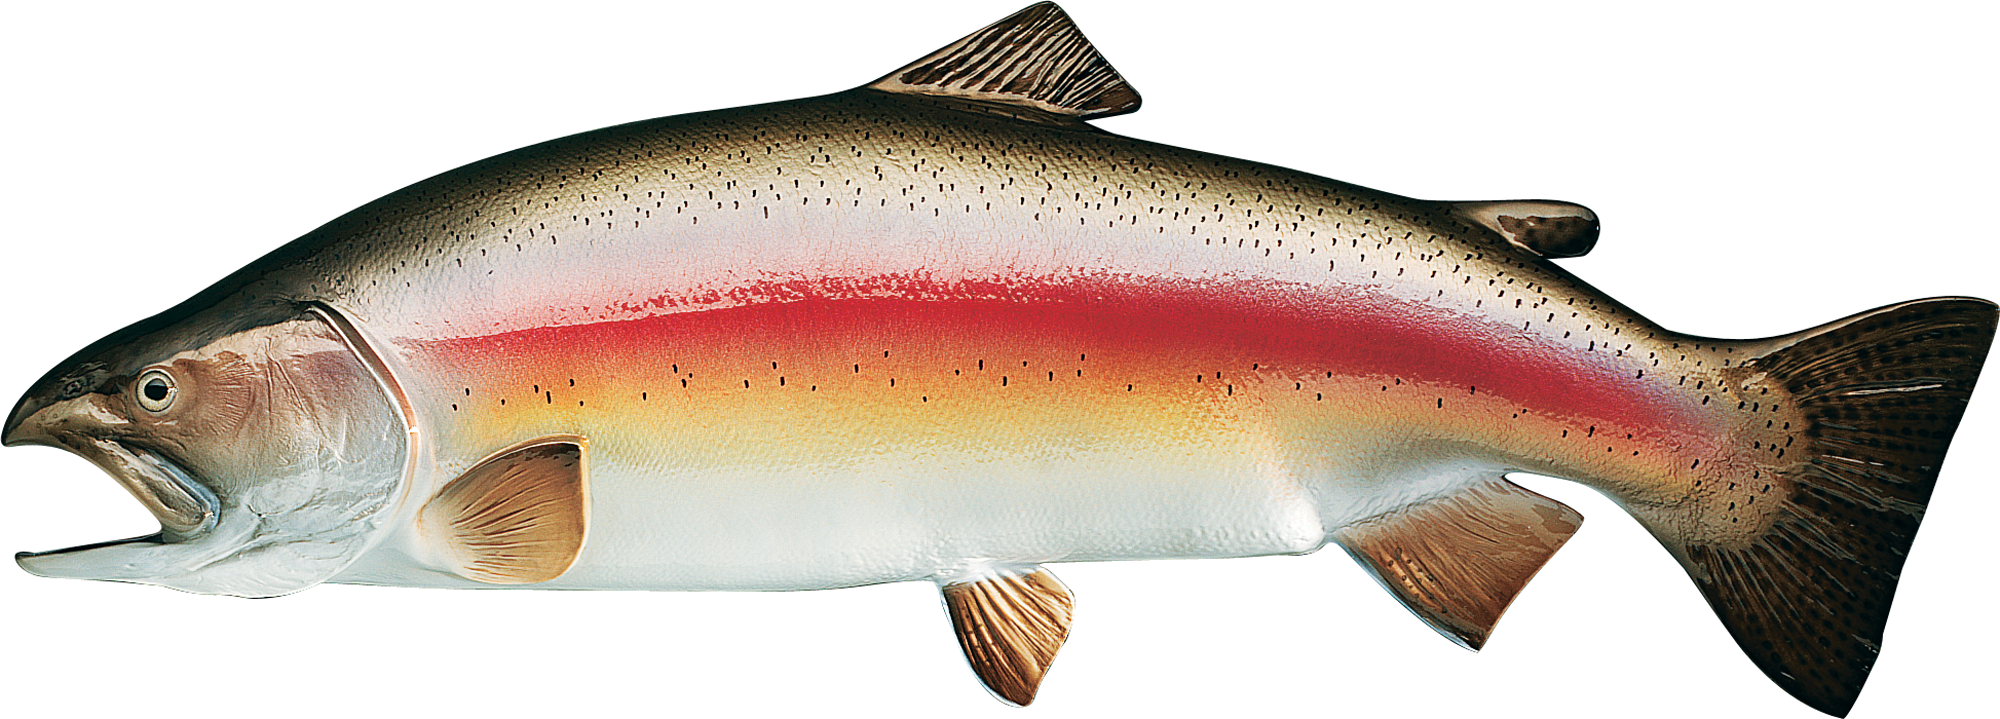 Cabela's Freshwater Fish Mount Replica Rainbow Trout